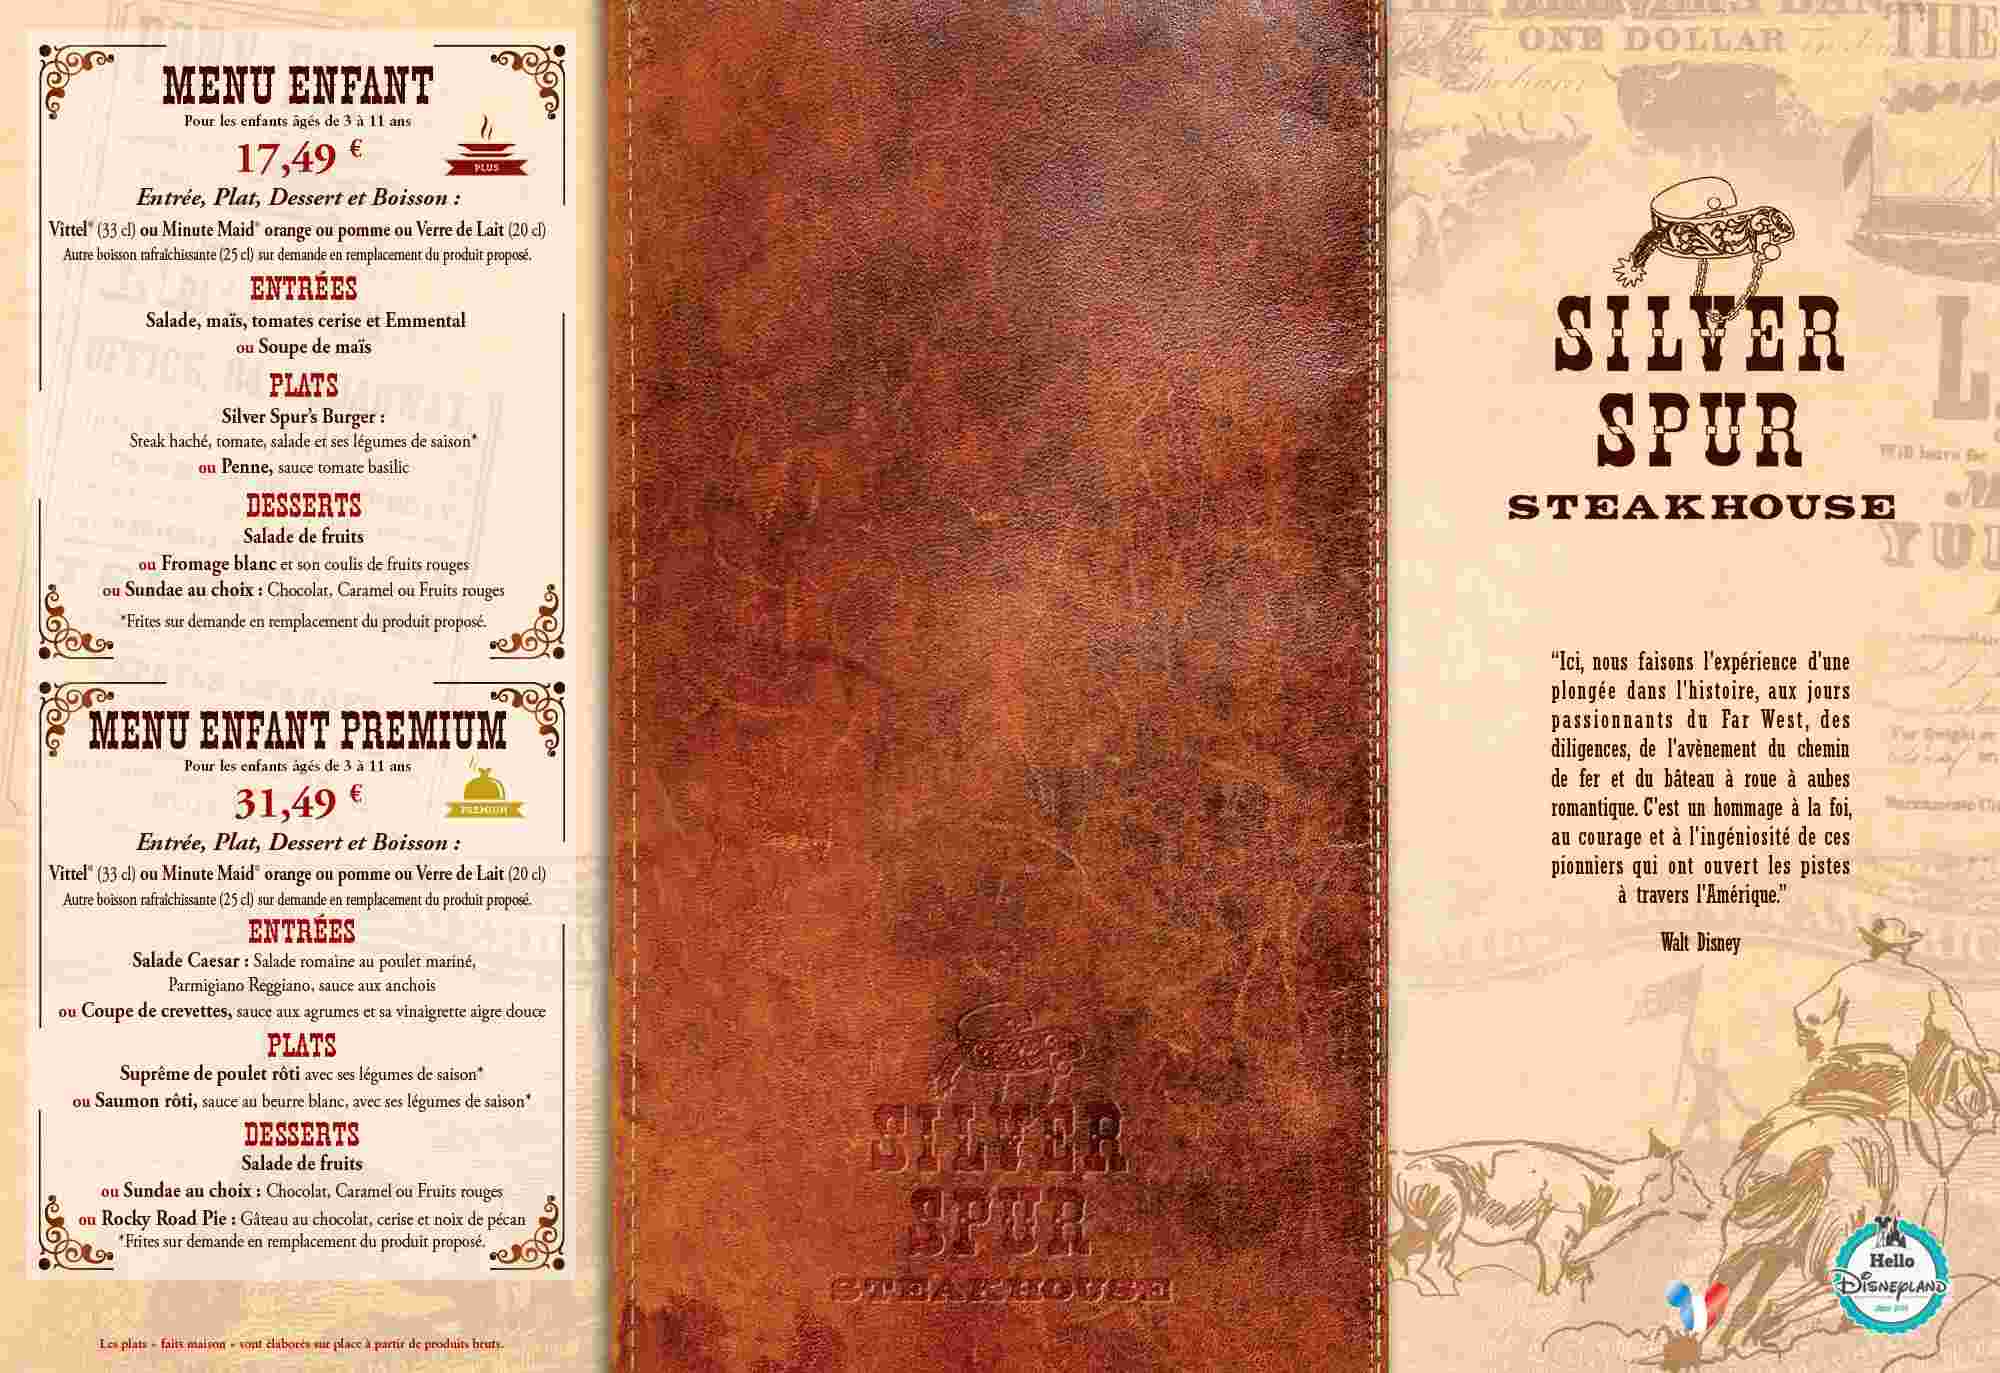 Frontierland :: Silver Spur Steakhouse - Pagina 8 Silver10